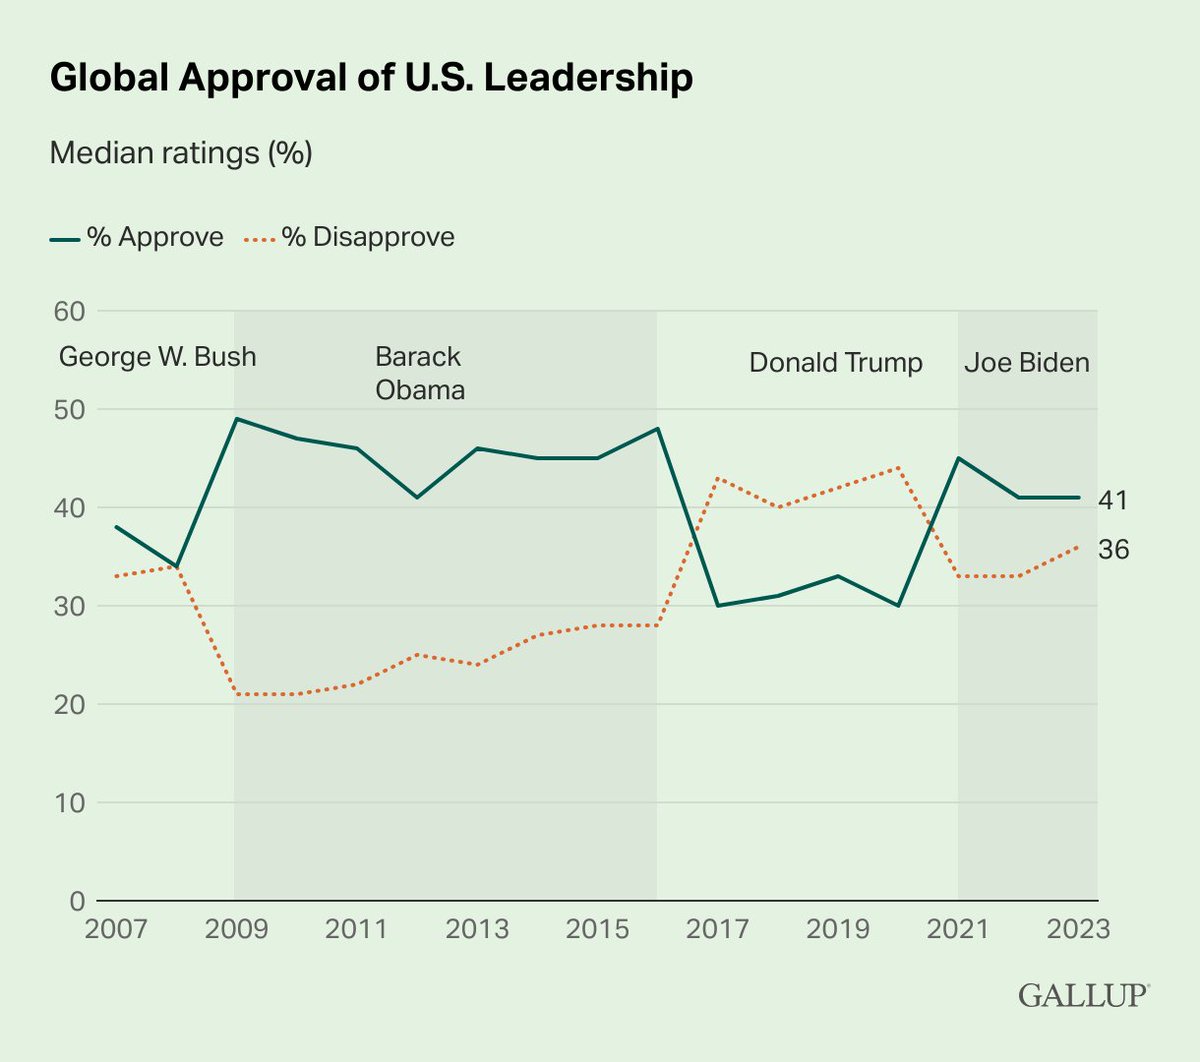 The median global approval rating of U.S. leadership stood at 41% in 2023. This is down from 45% during Biden’s first year in office but unchanged from his second.